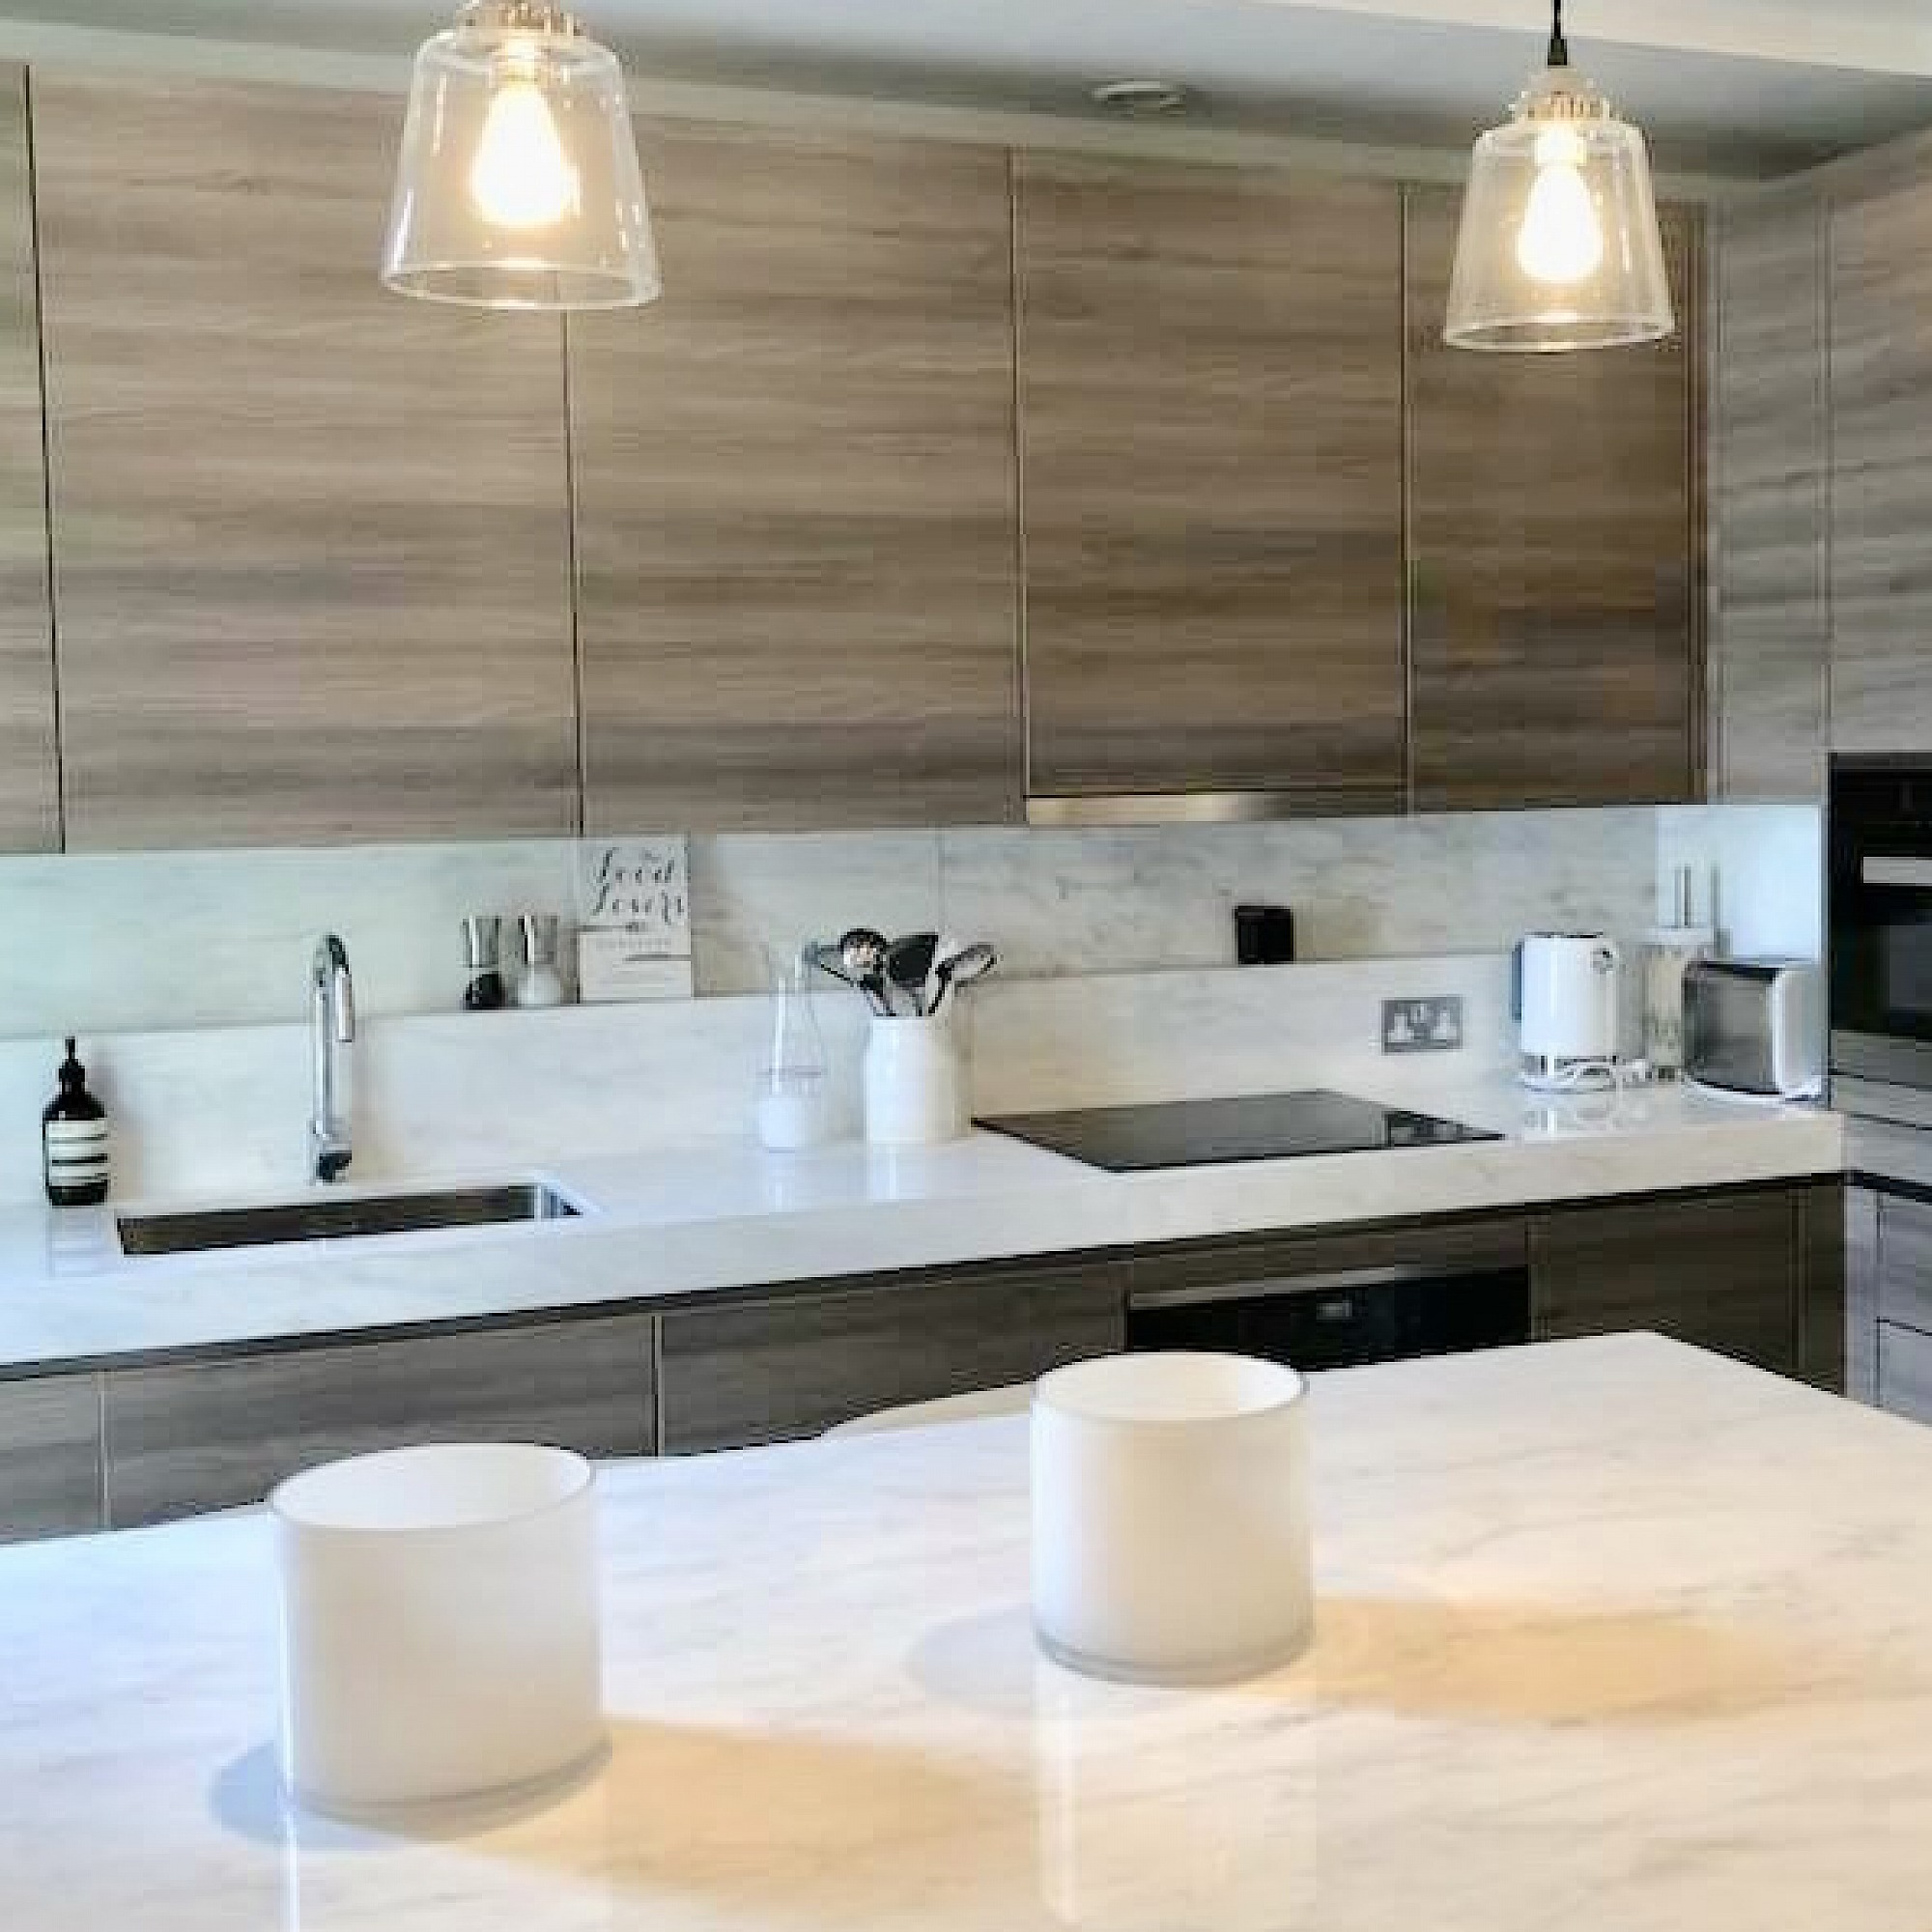 Exclusive designer kitchen marble surfaces South Kensington, with Miele appliances handle-less design in a horizontal veneer cabinets